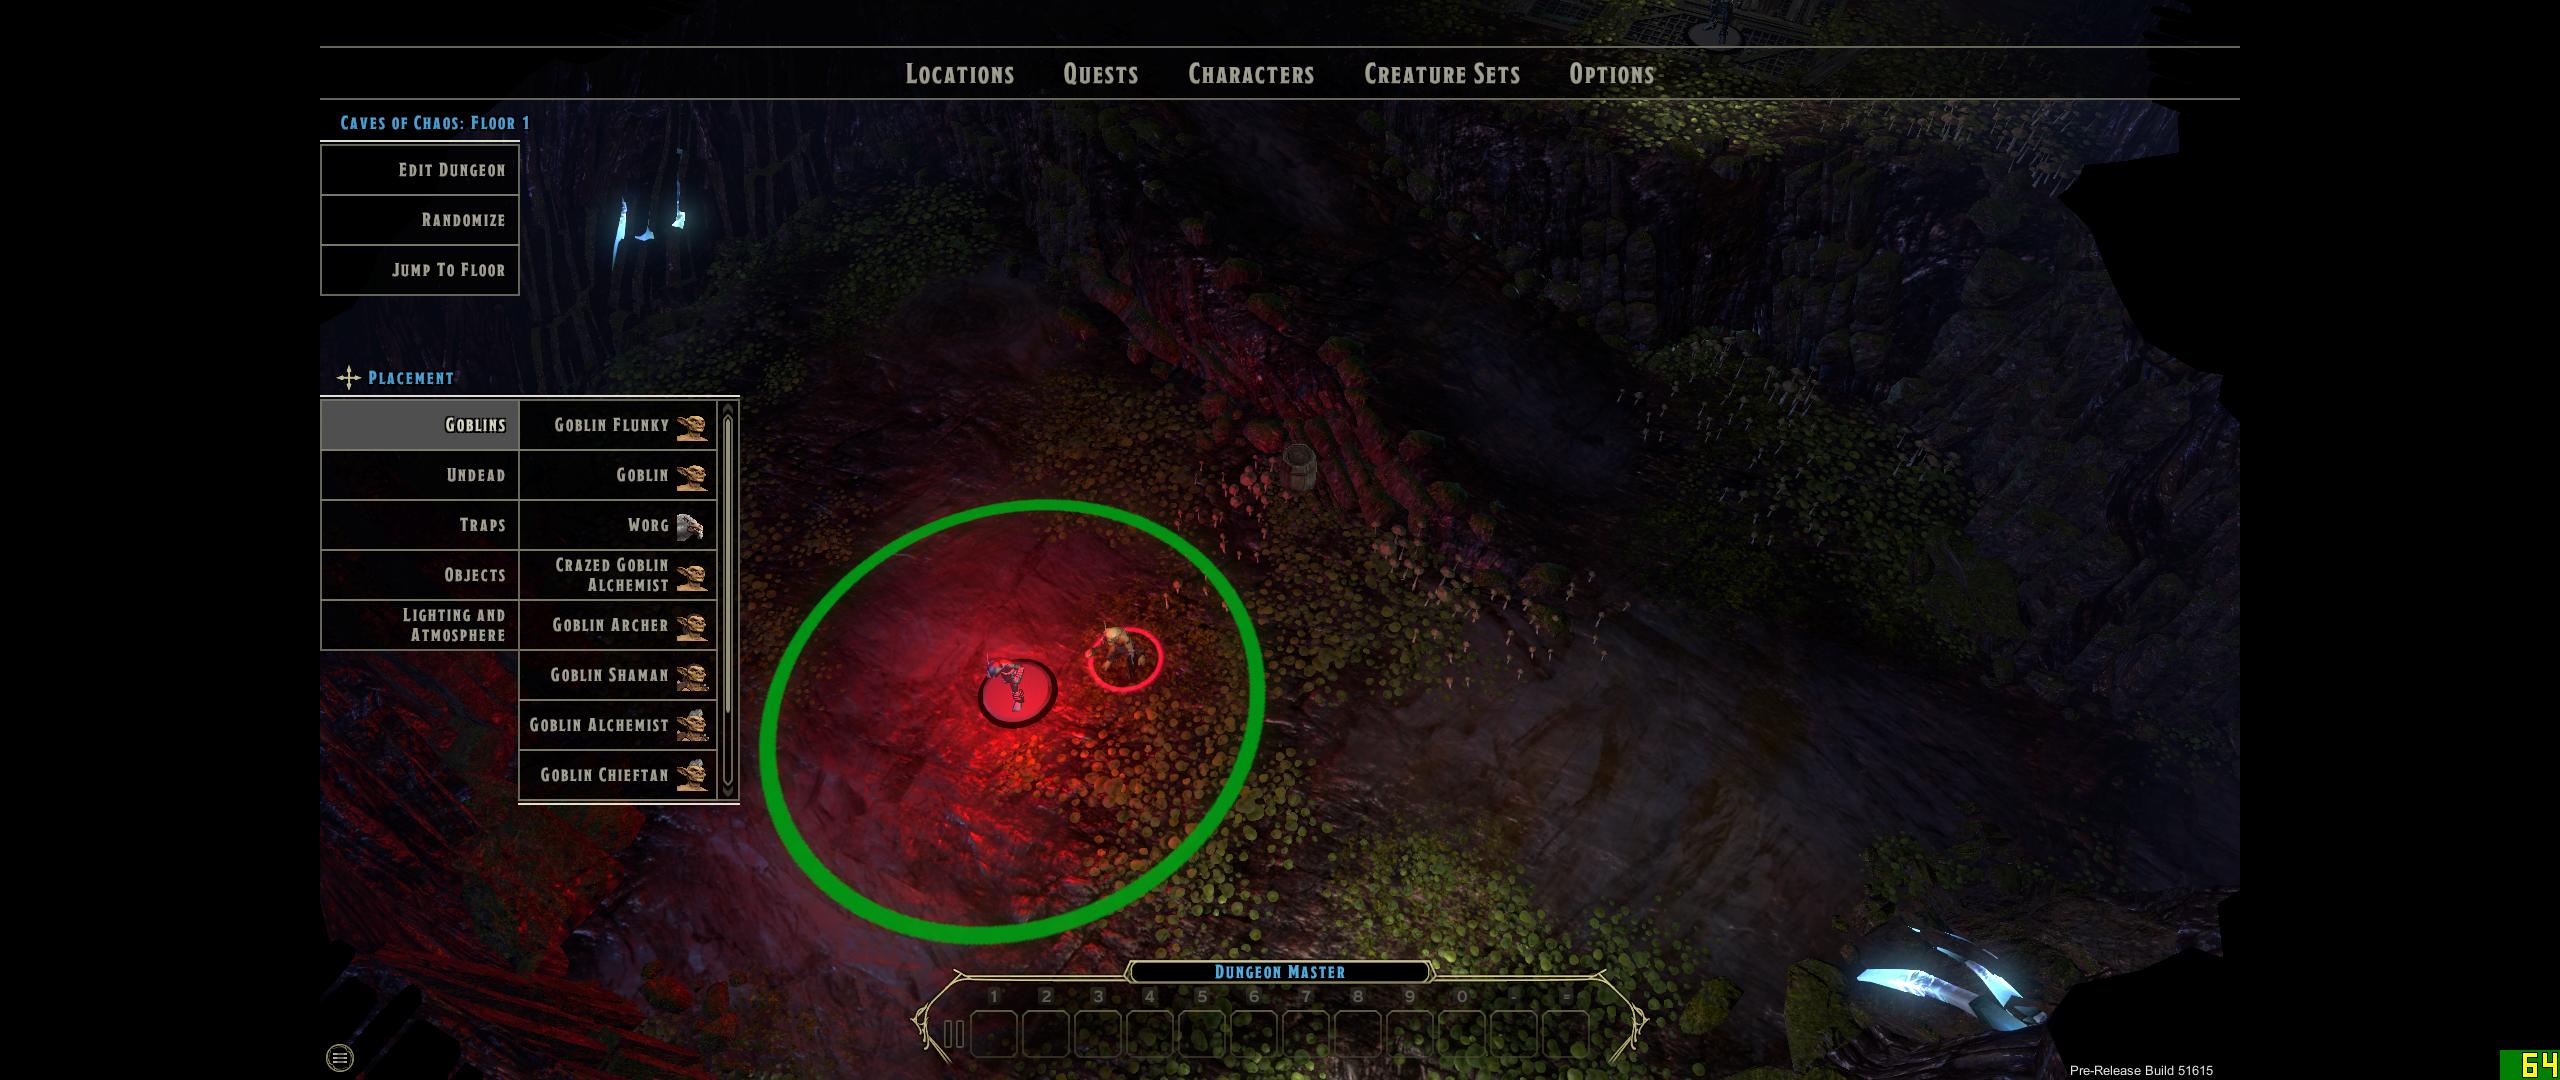 It's easy to create encounters in Sword Coast Legends' dungeon master tools.